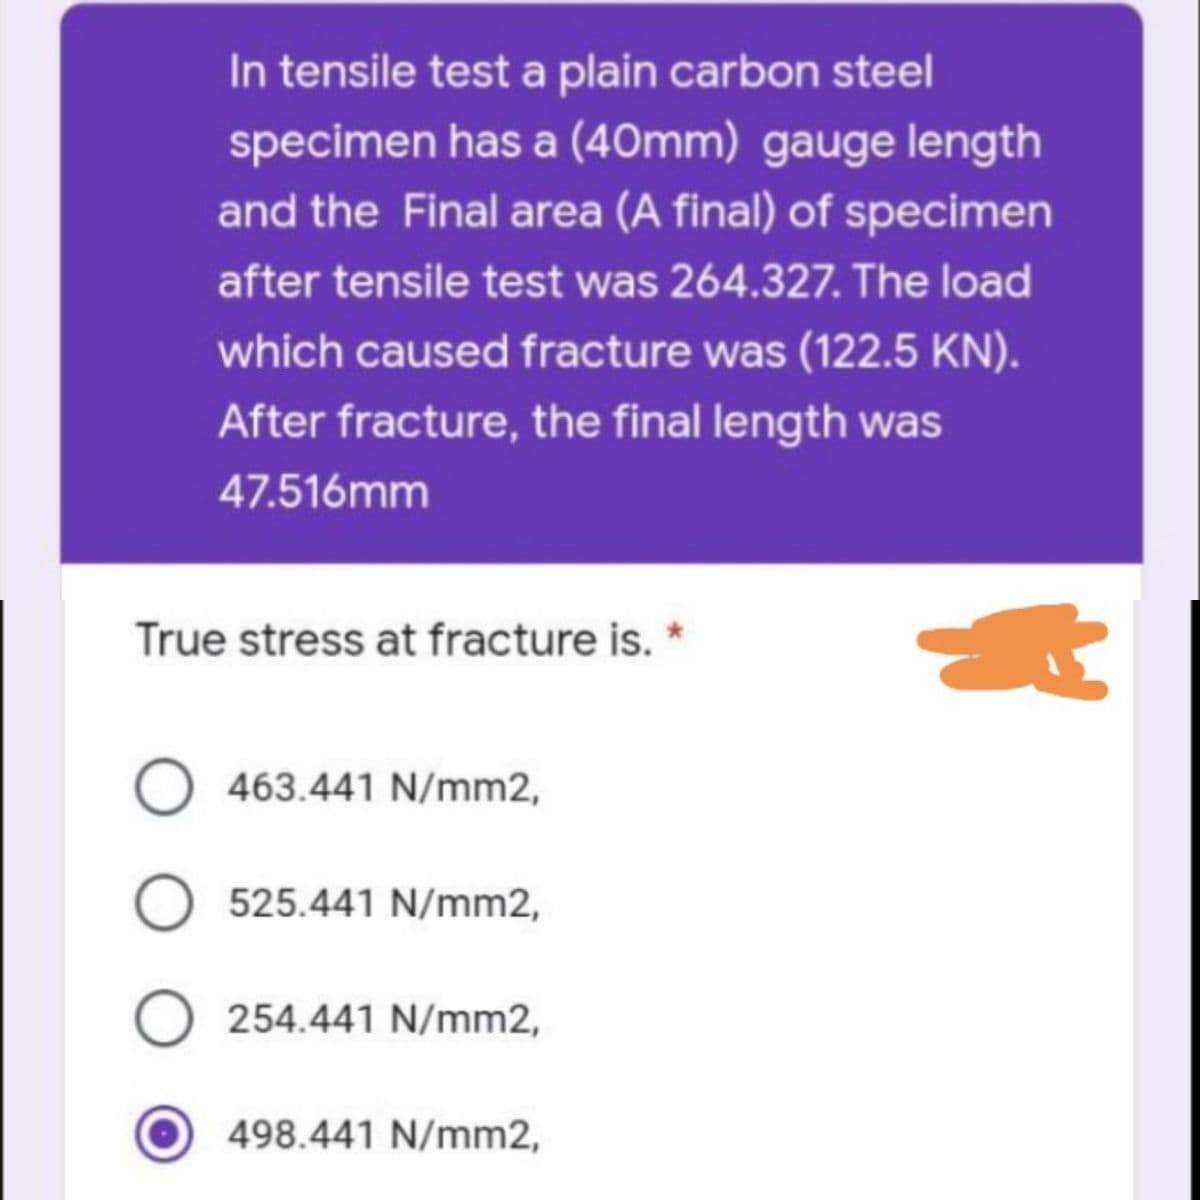 In tensile test a plain carbon steel
specimen has a (40mm) gauge length
and the Final area (A final) of specimen
after tensile test was 264.327. The load
which caused fracture was (122.5 KN).
After fracture, the final length was
47.516mm
True stress at fracture is. *
O 463.441 N/mm2,
O 525.441 N/mm2,
O 254.441 N/mm2,
498.441 N/mm2,